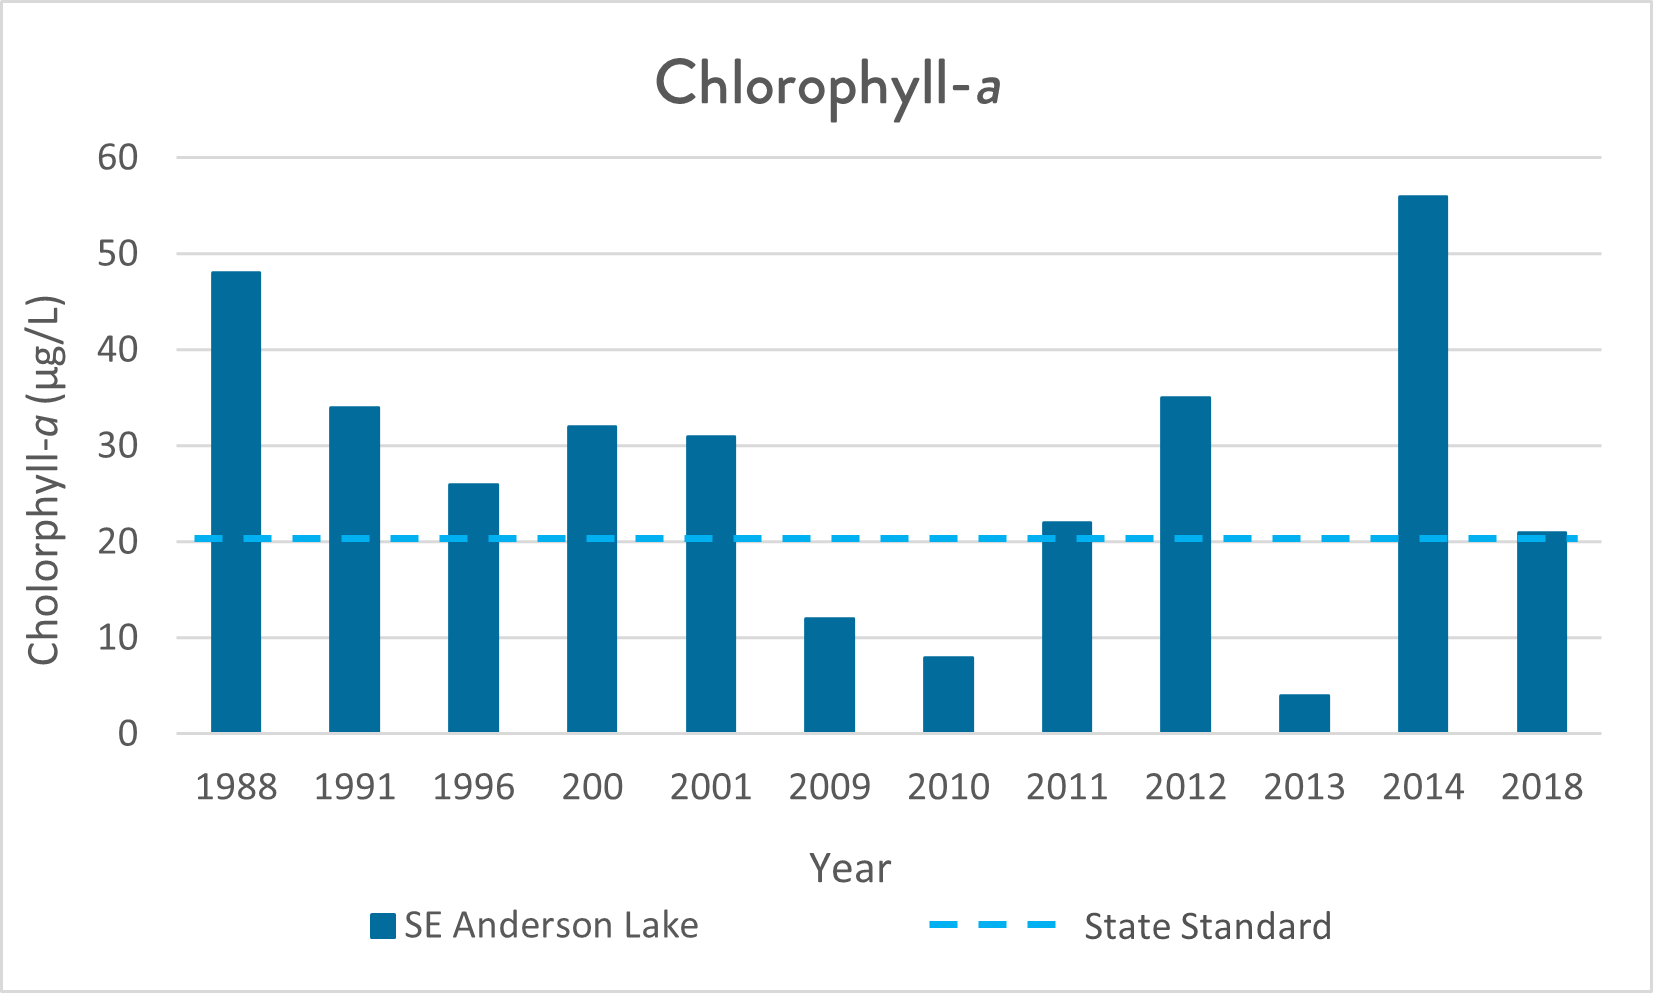 graph of chlorophyll-a levels in SE Anderson Lake from 1988 to 2018